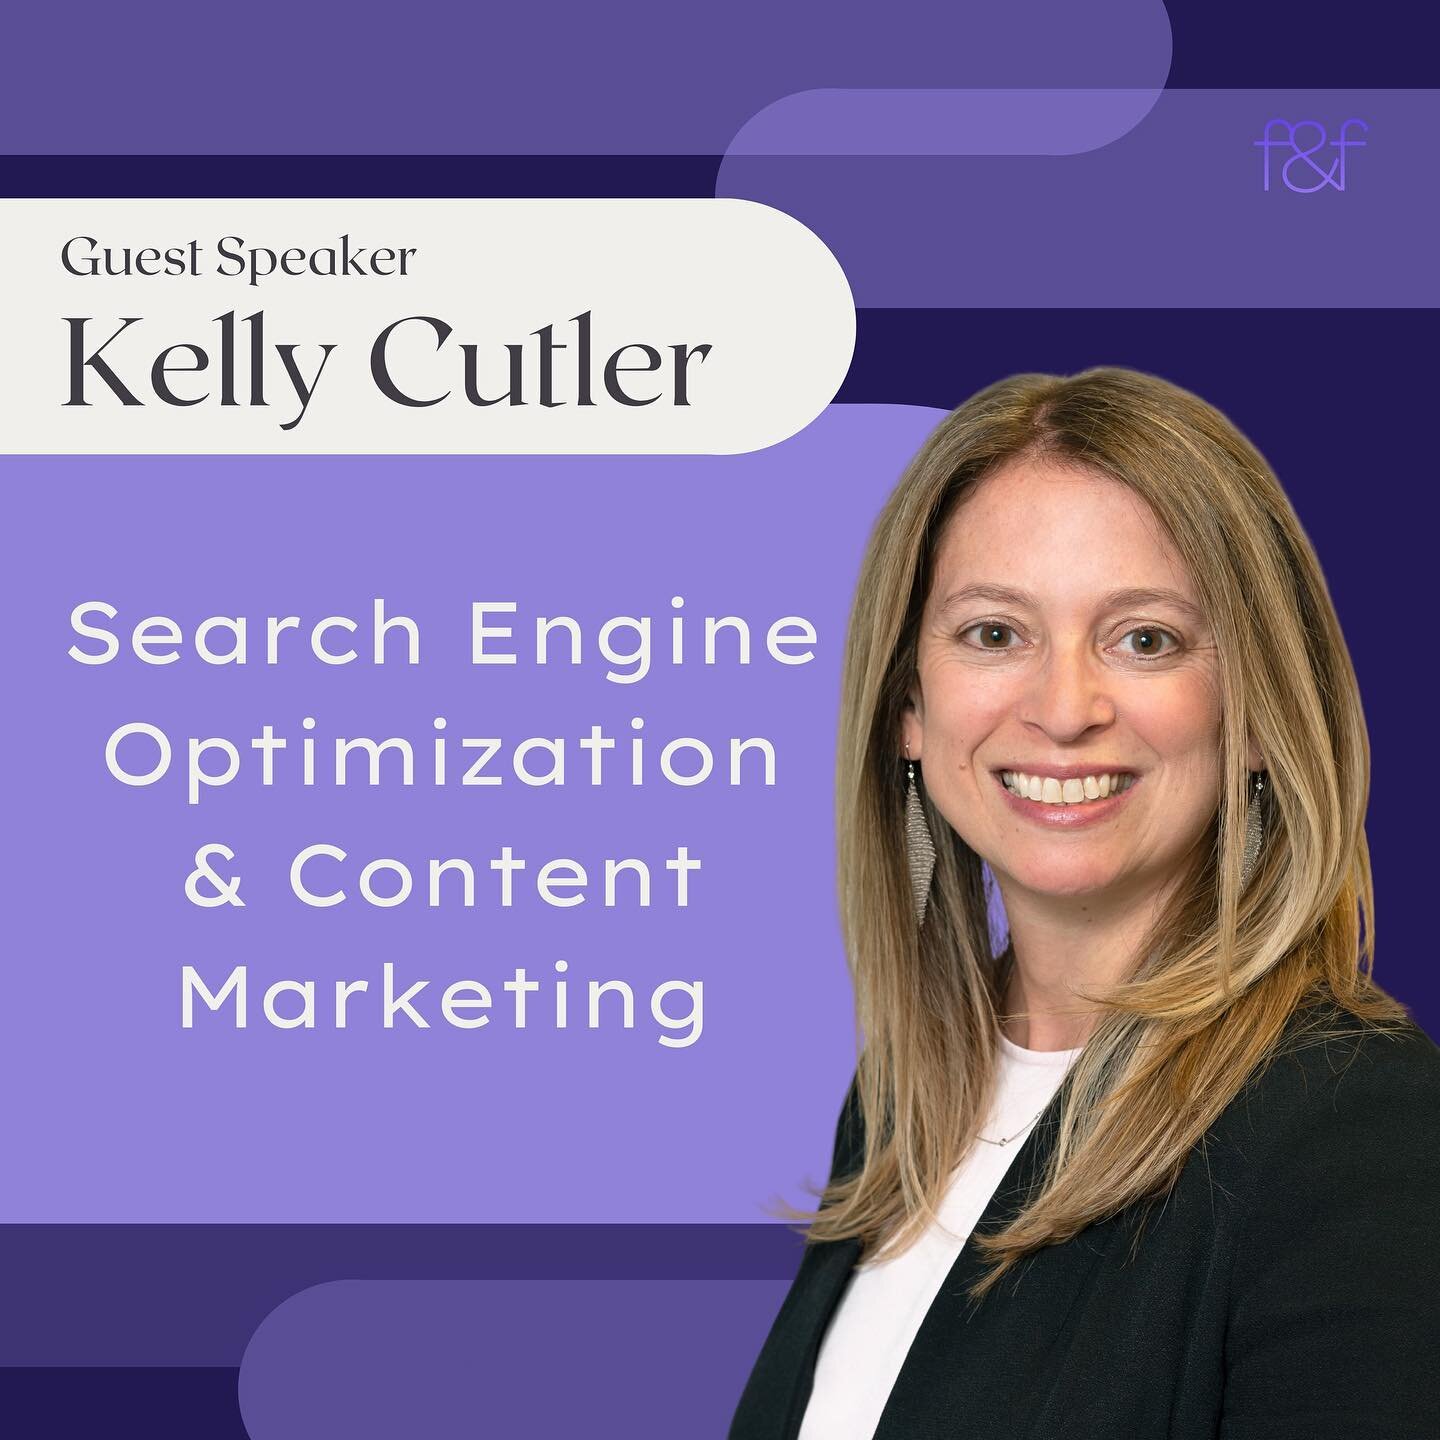 One way that F&amp;F expands our members&rsquo; knowledge is through guest speakers. 

Last week, IMC Professor Kelly Cutler was invited to speak on search engine optimization and content marketing. We are so grateful to have the opportunity to learn